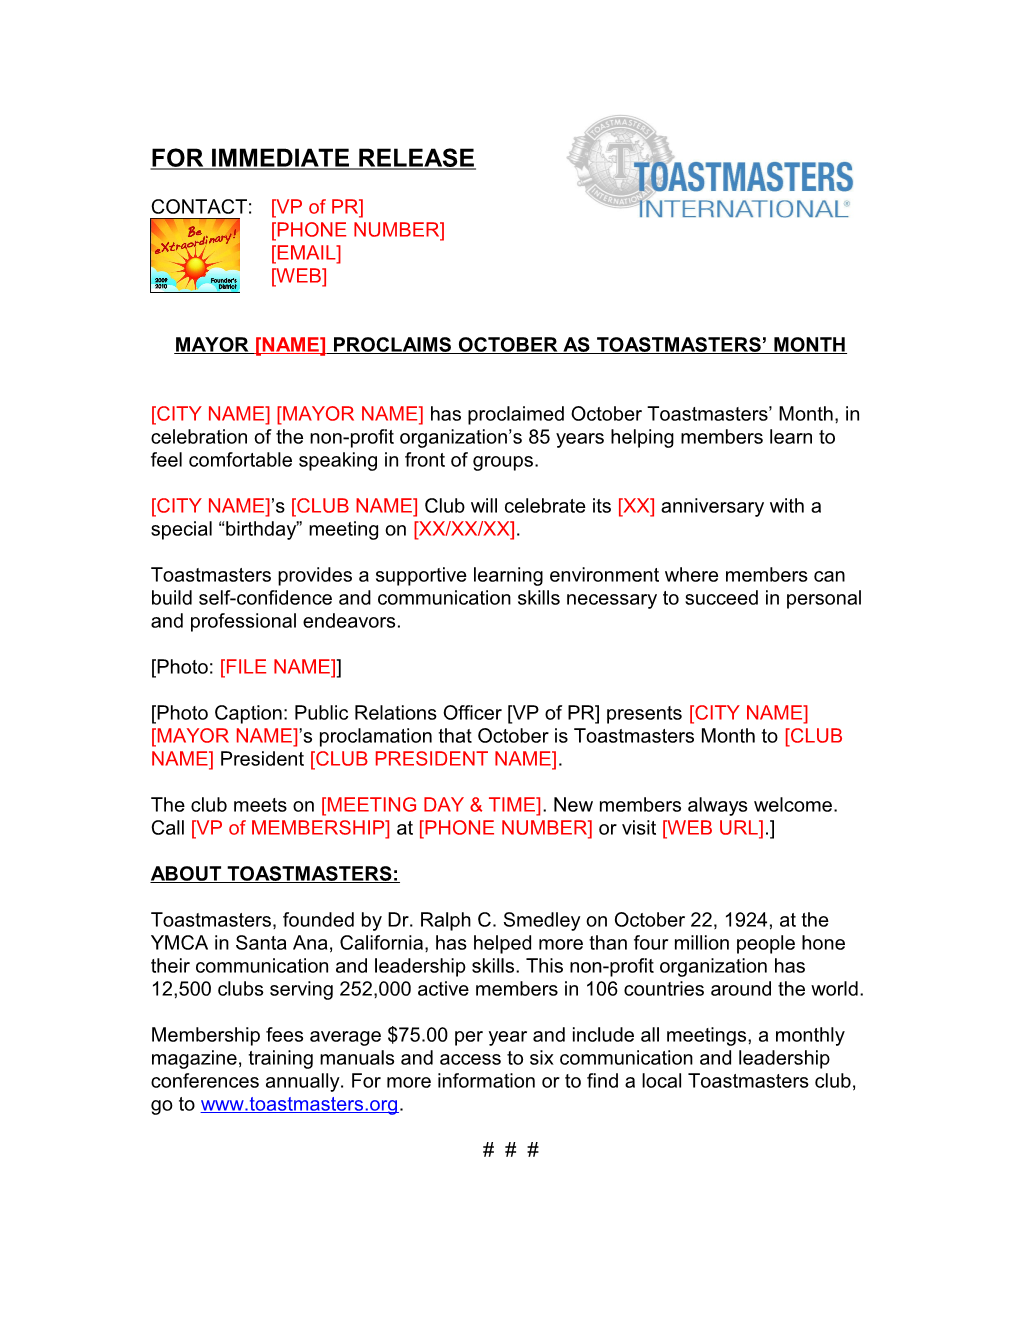 Toastmasters Proclamation Press Release